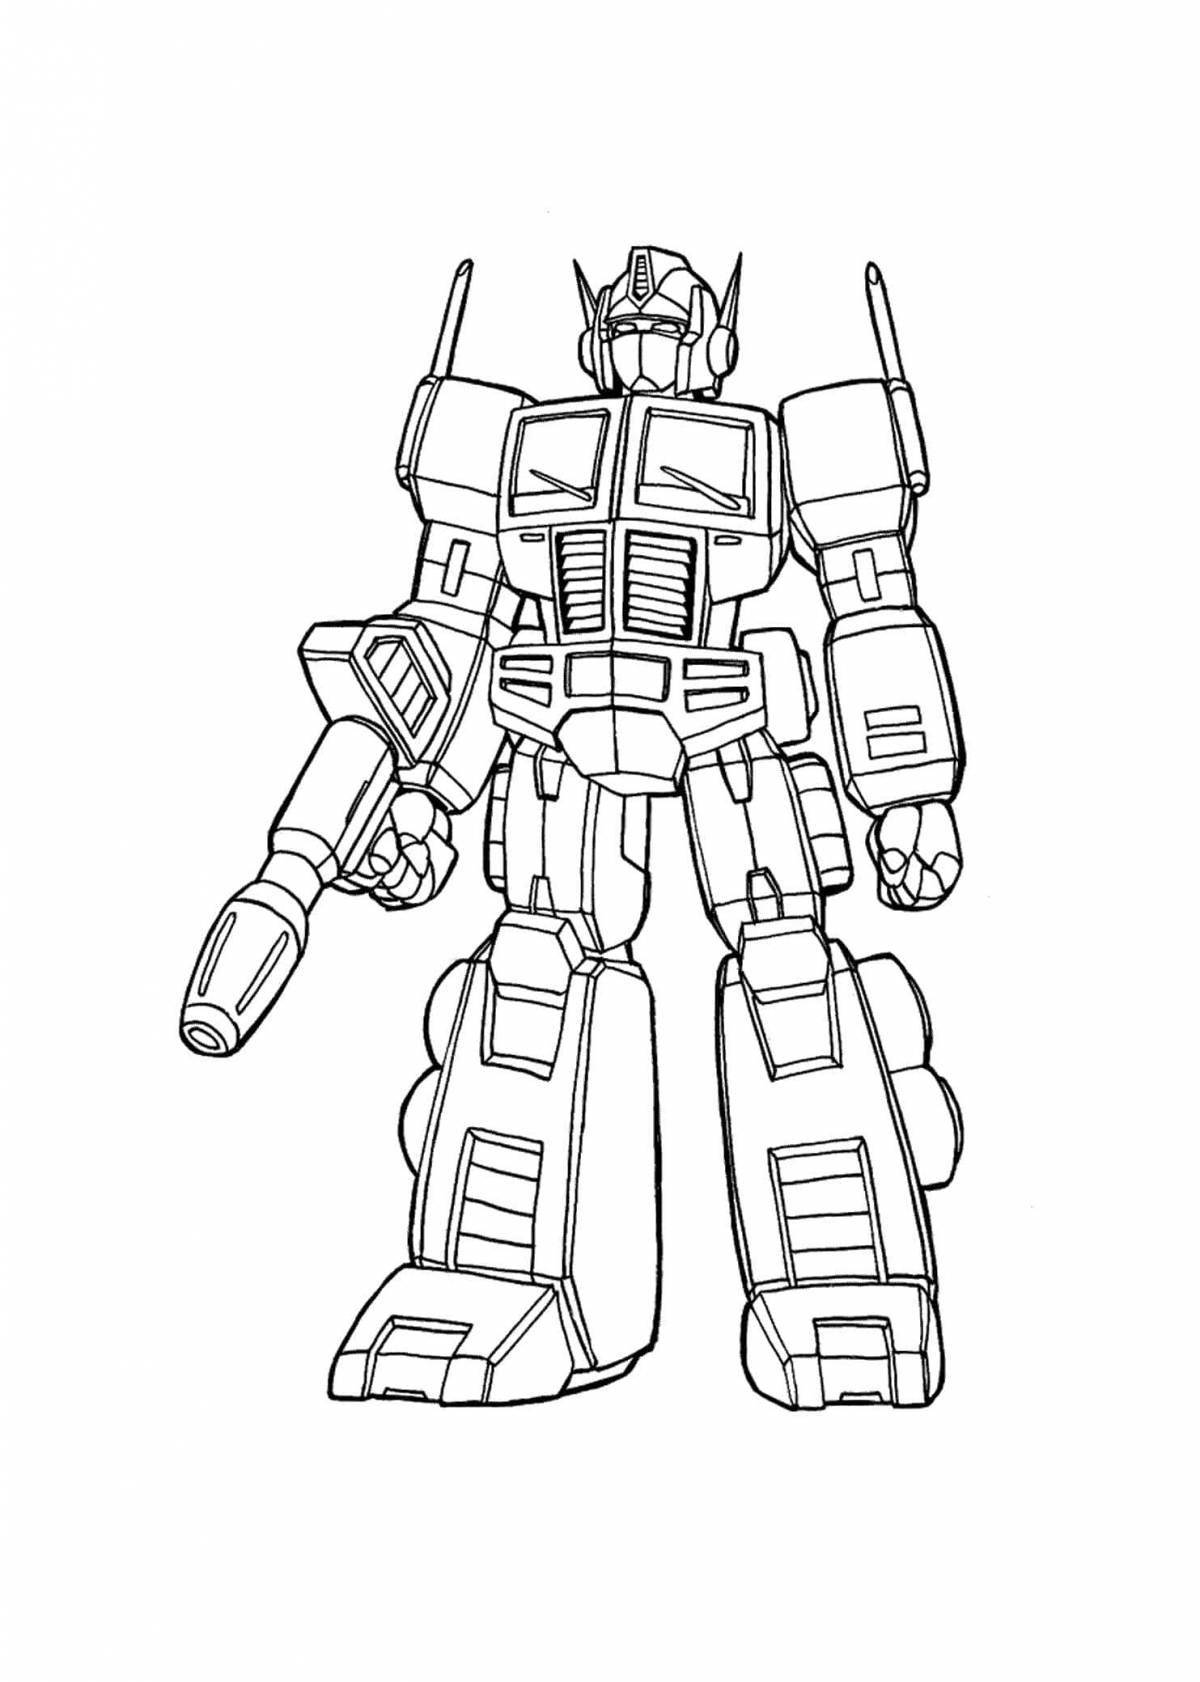 Adorable Autobot coloring book